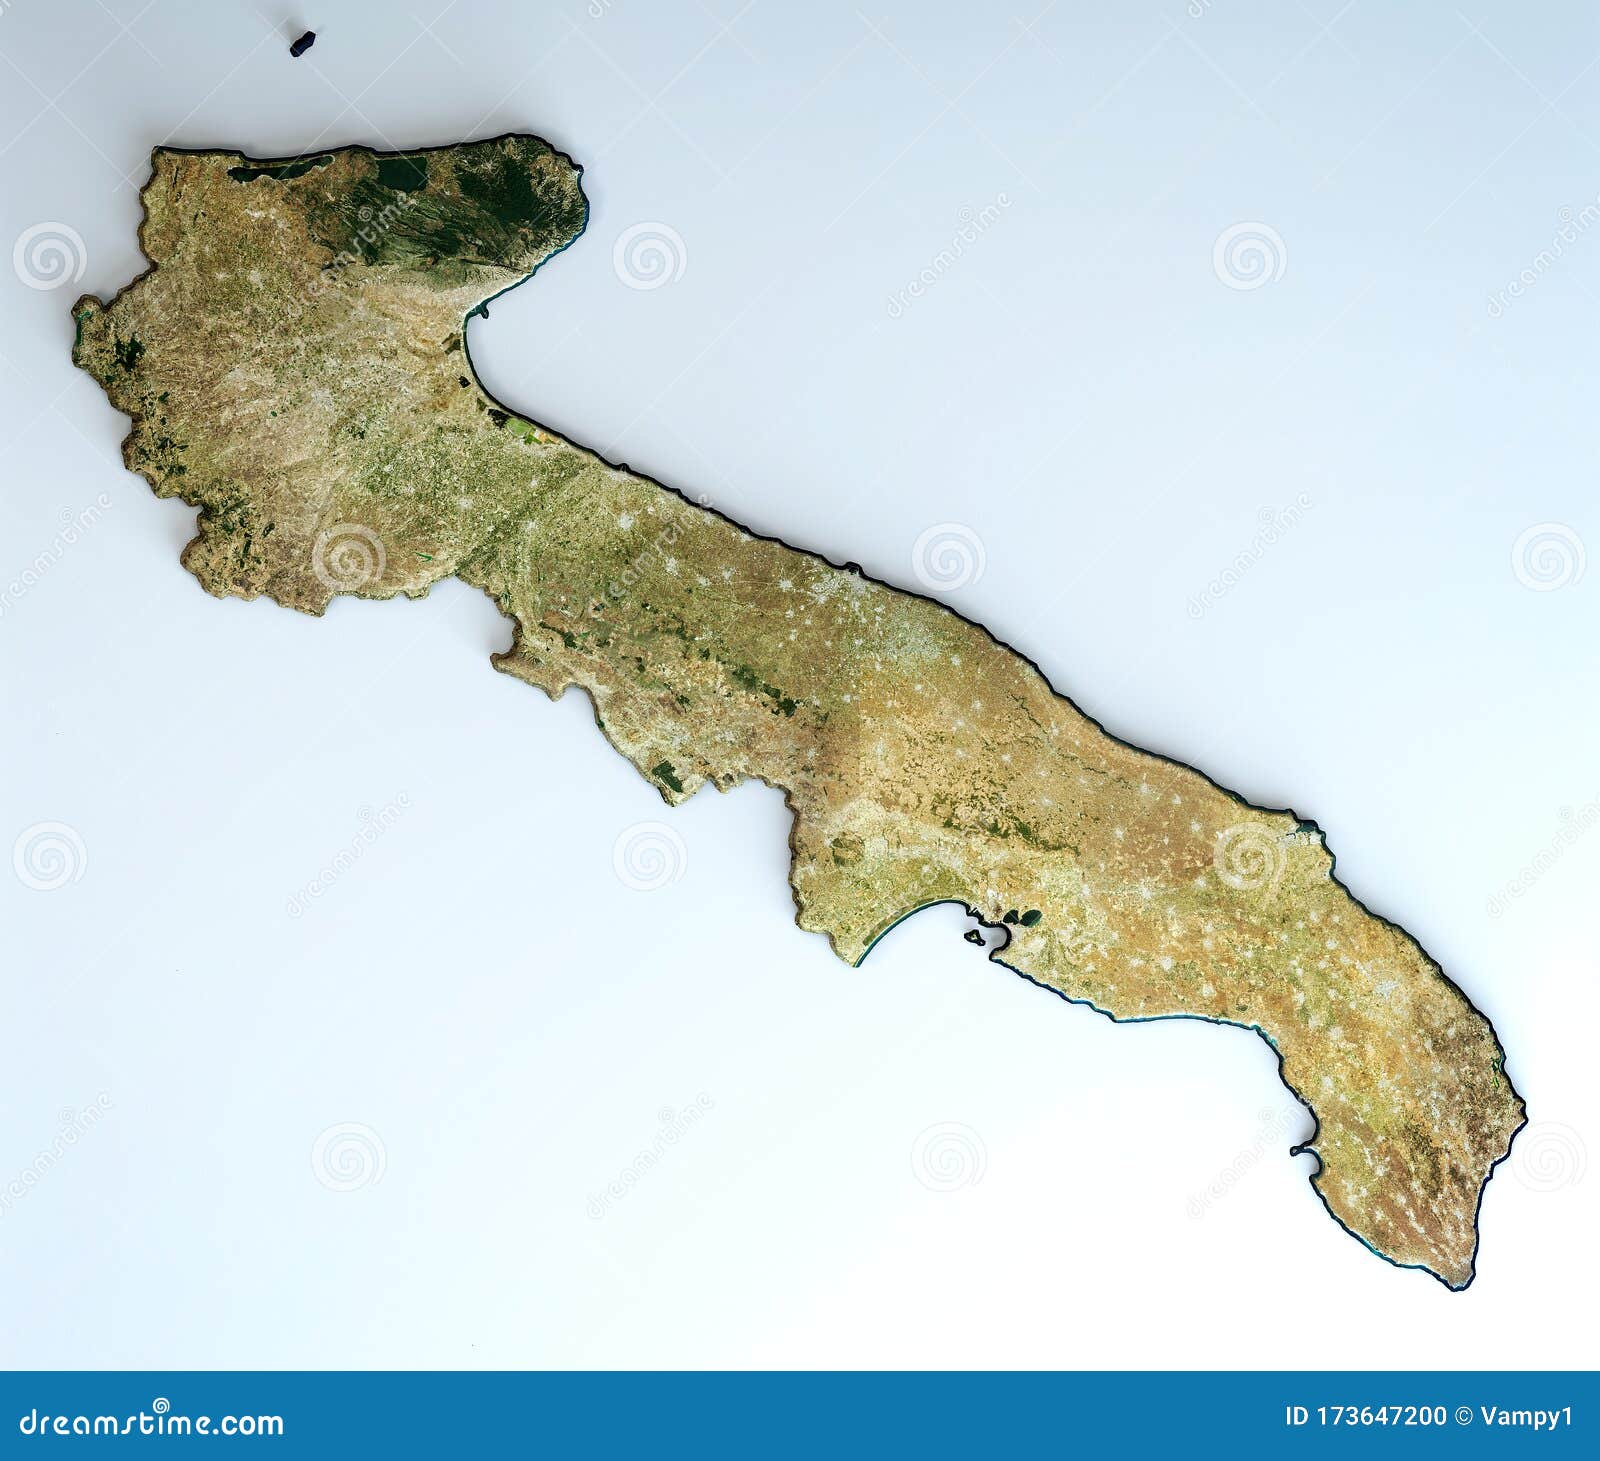 Map highlighting the regions of Puglia and Piedmont in Italy